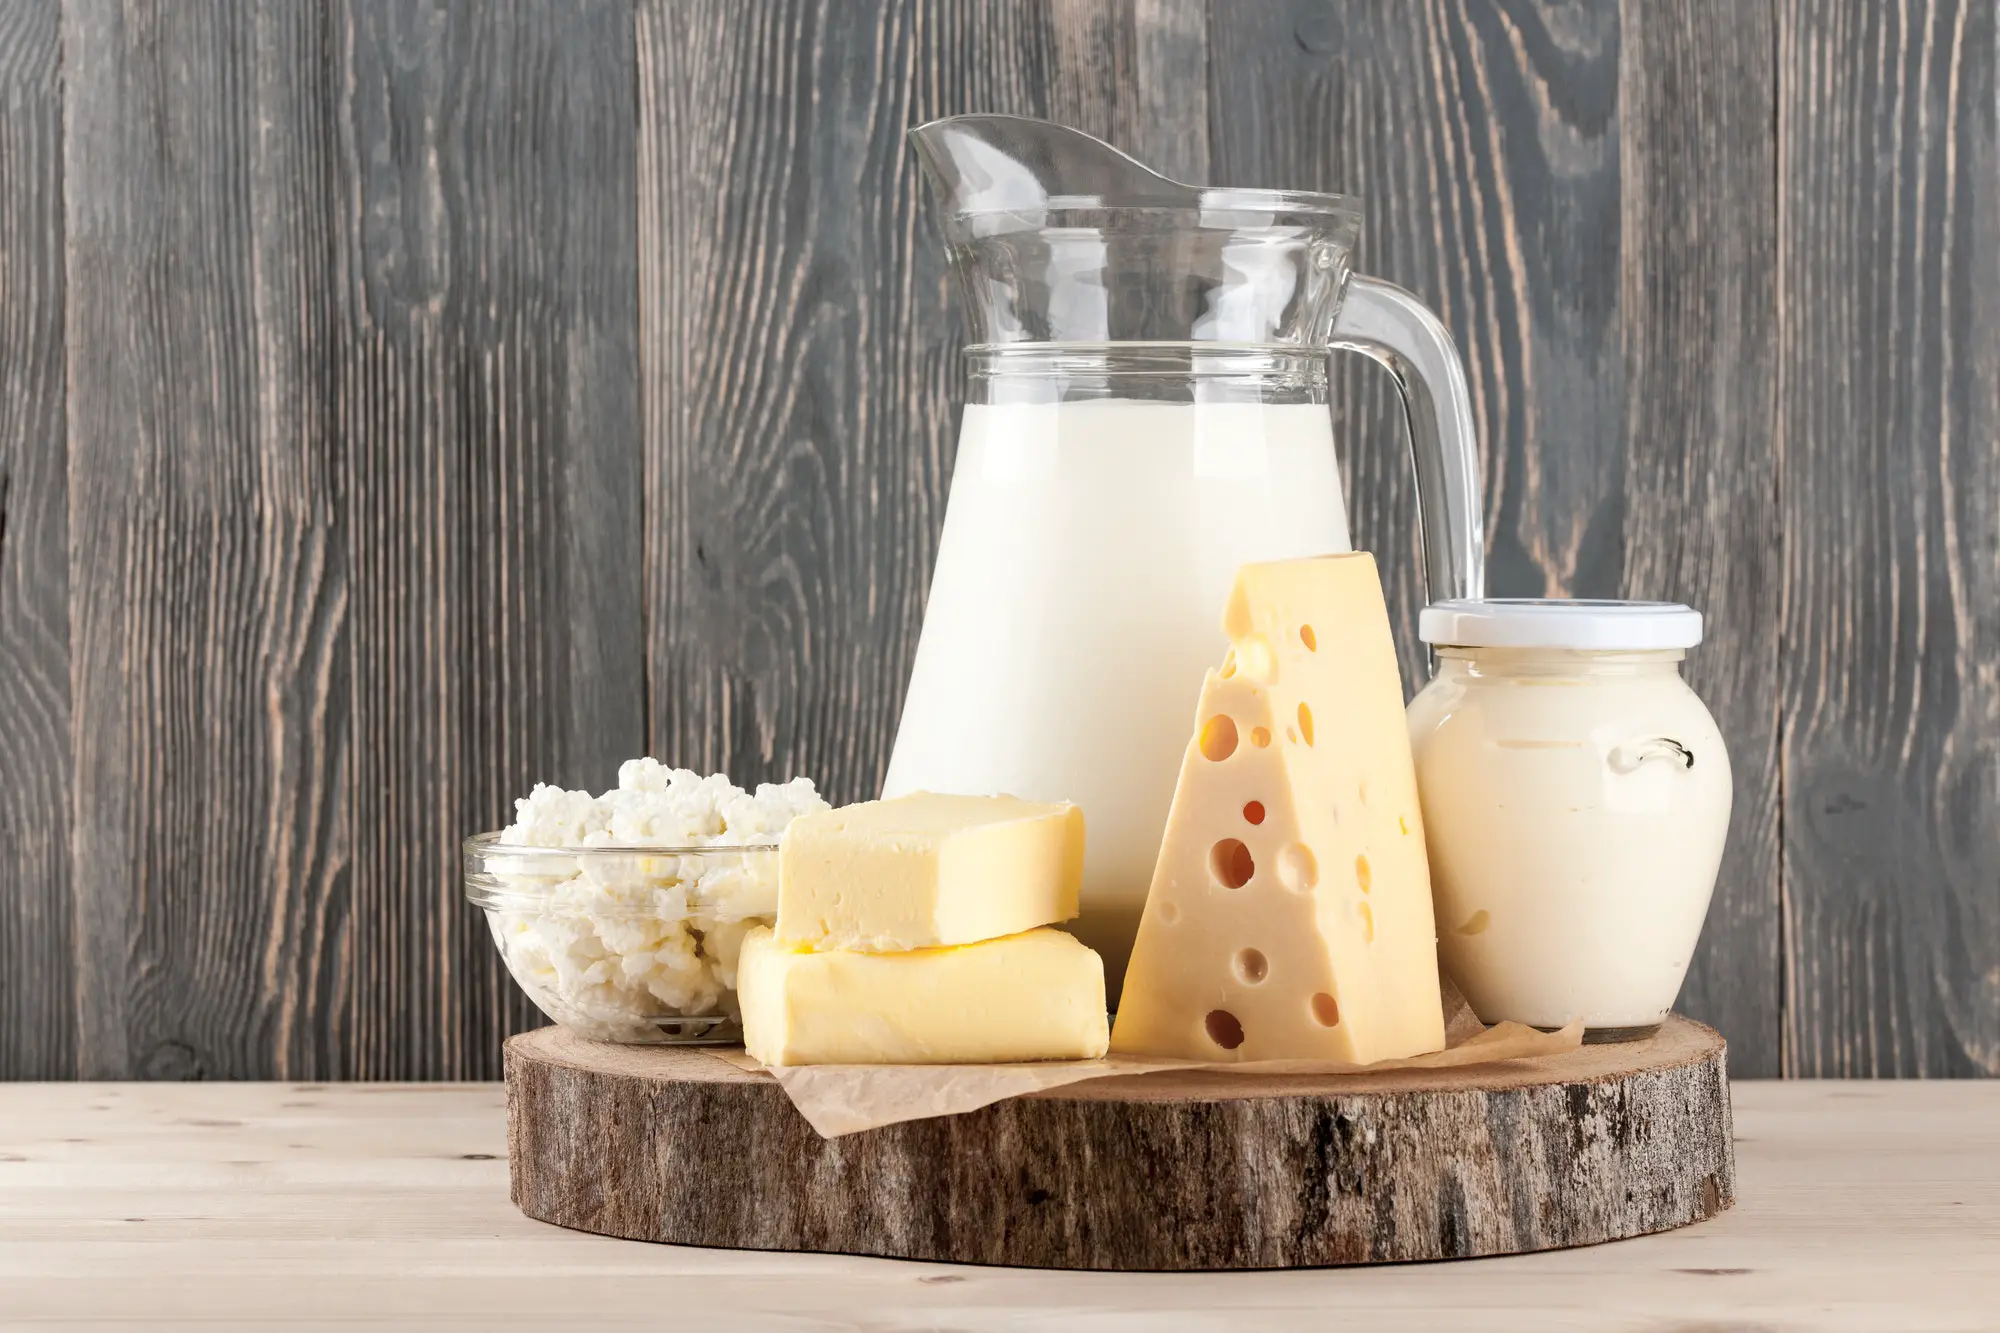 foods to avoid that contain dairy